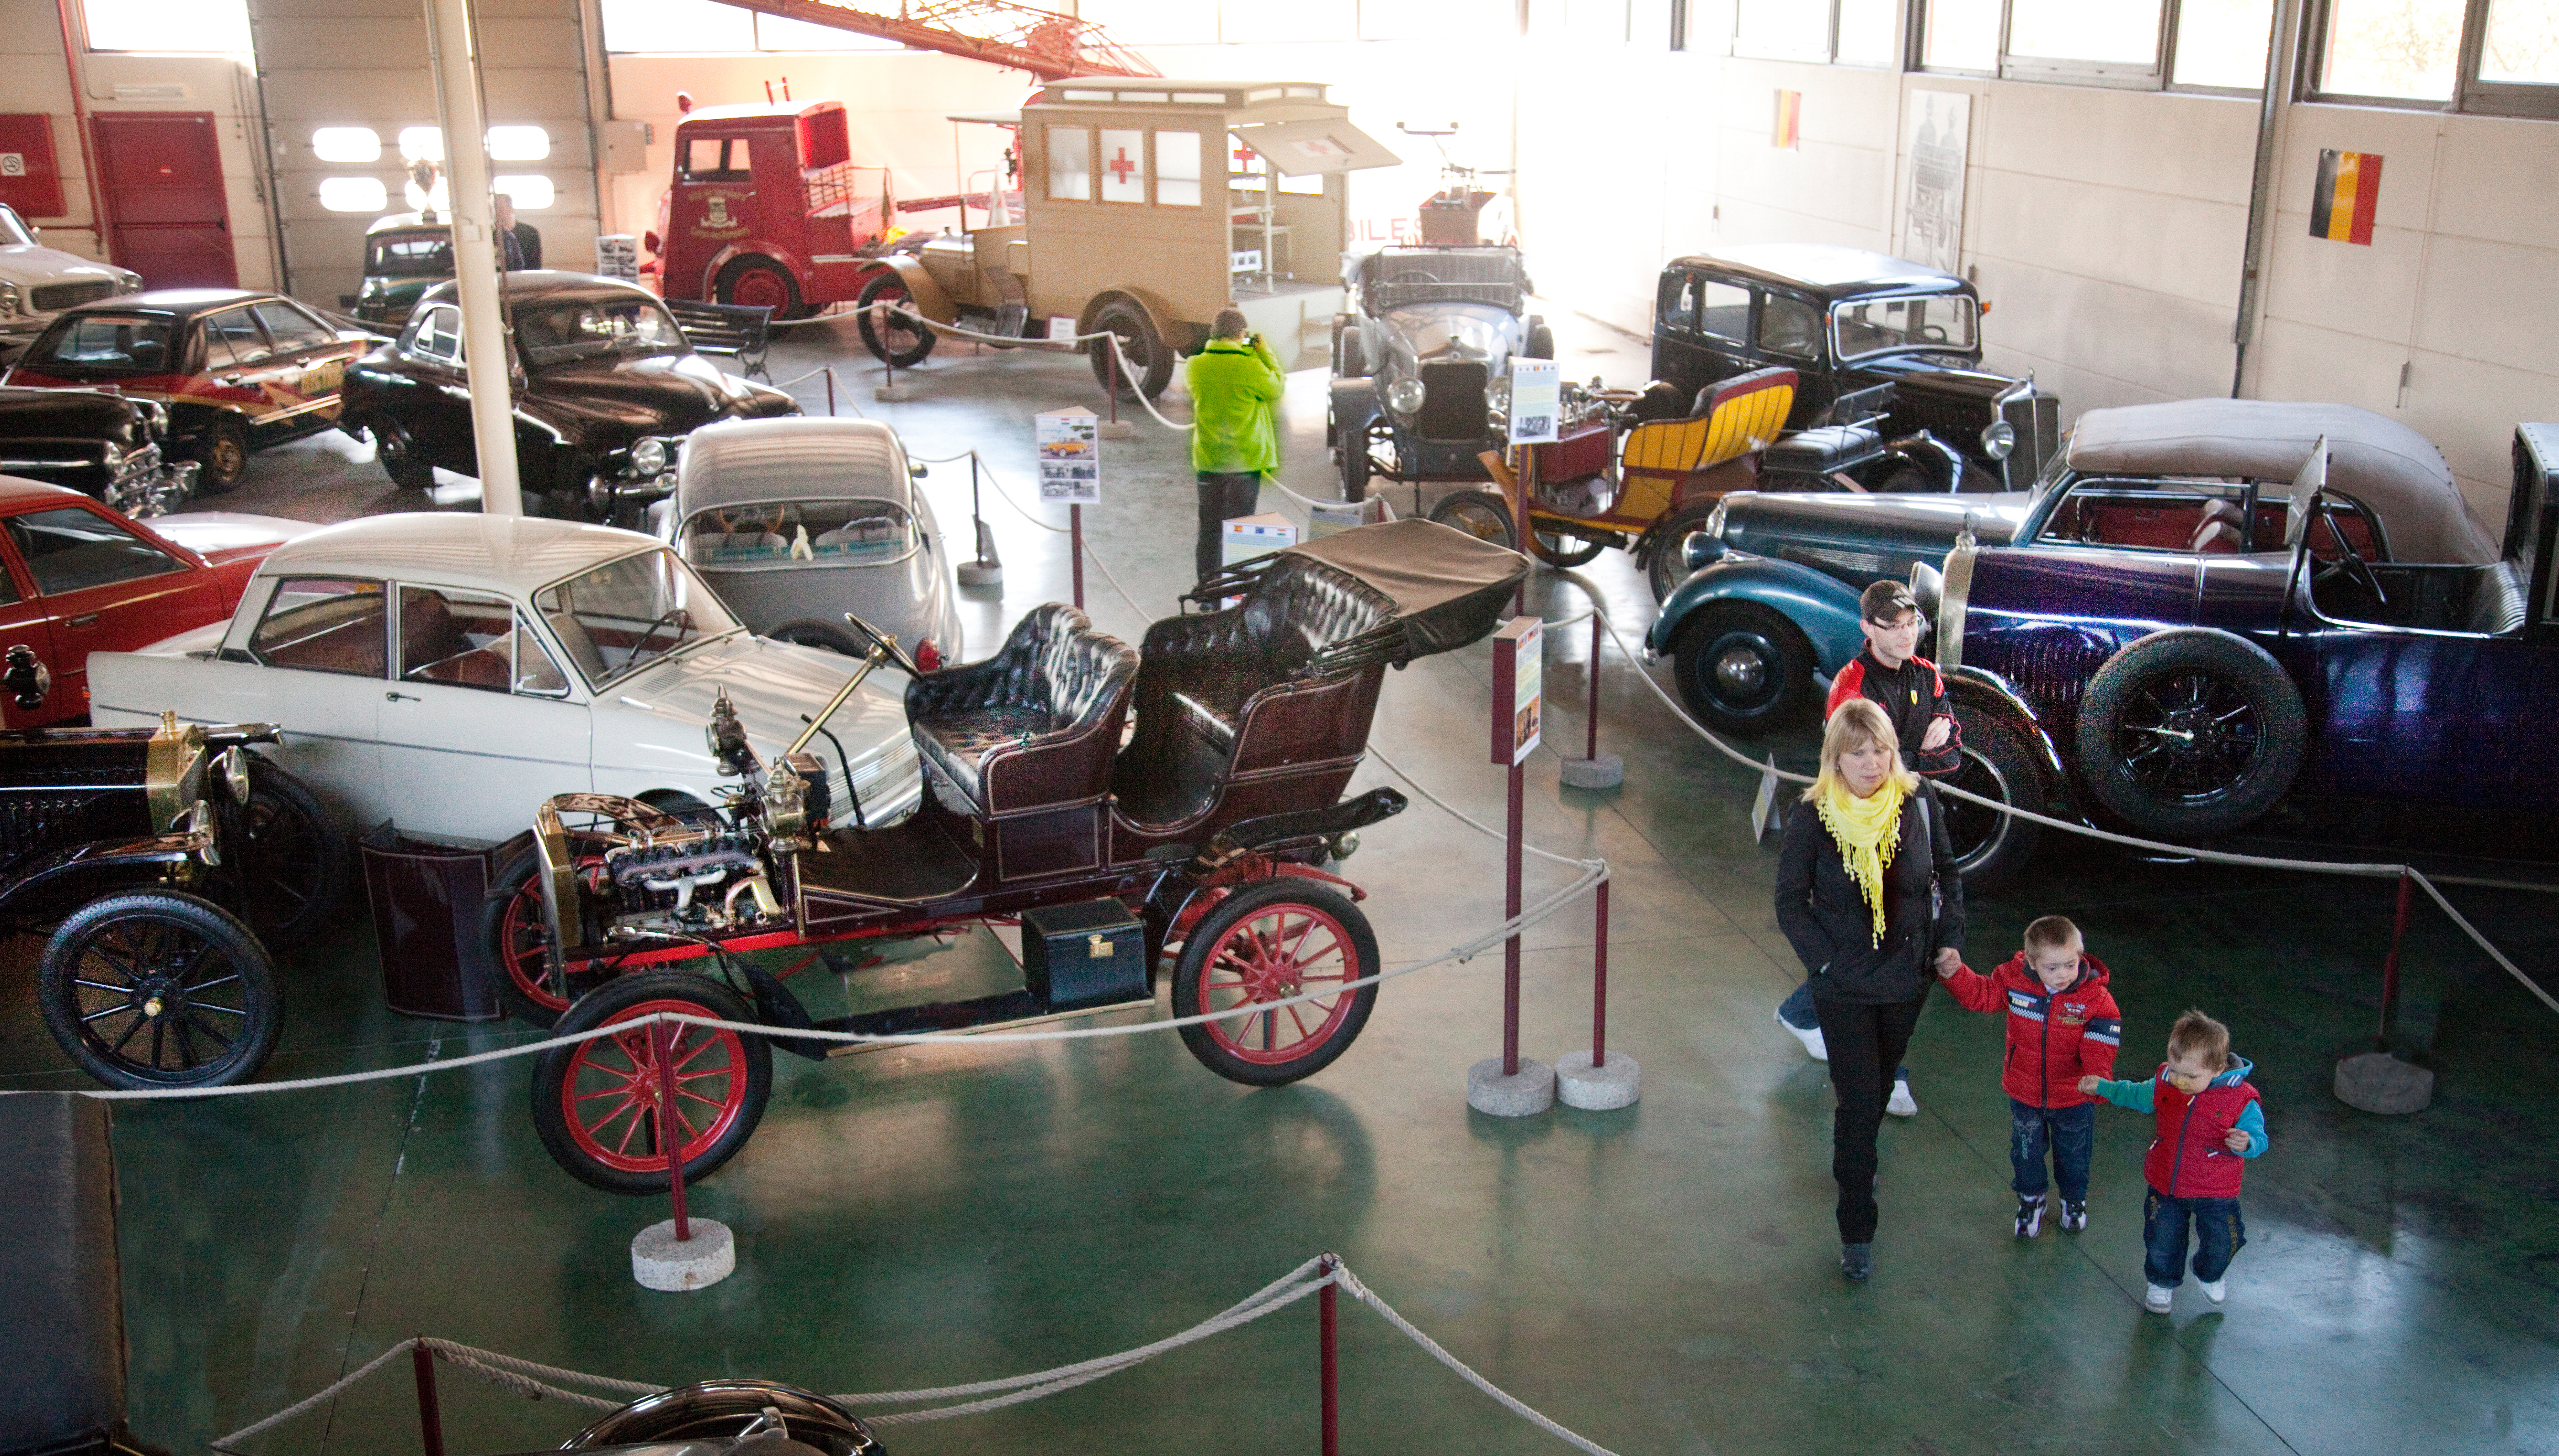 Discover the history of automobile and road transport since 1895 at the Musée de l'Auto Mahymobiles in Leuze-en-Hainaut